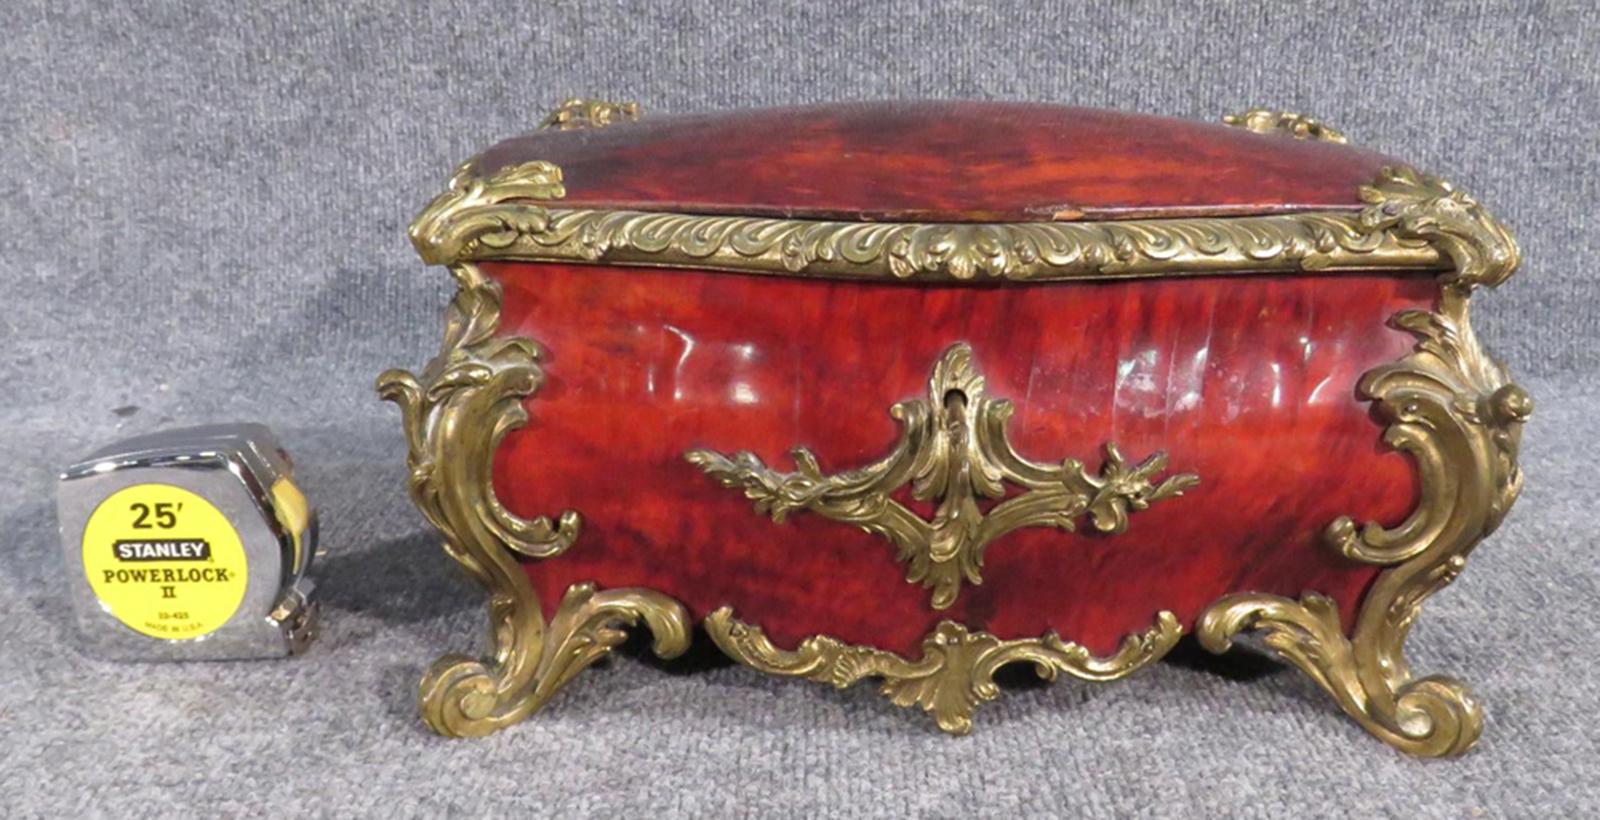 This is a fantastic French jewelry casket with tortoiseshell veneer and while it does have some condition issues as the photos clearly show, the casket is still incredibly beautiful and rich looking. It measures: 8